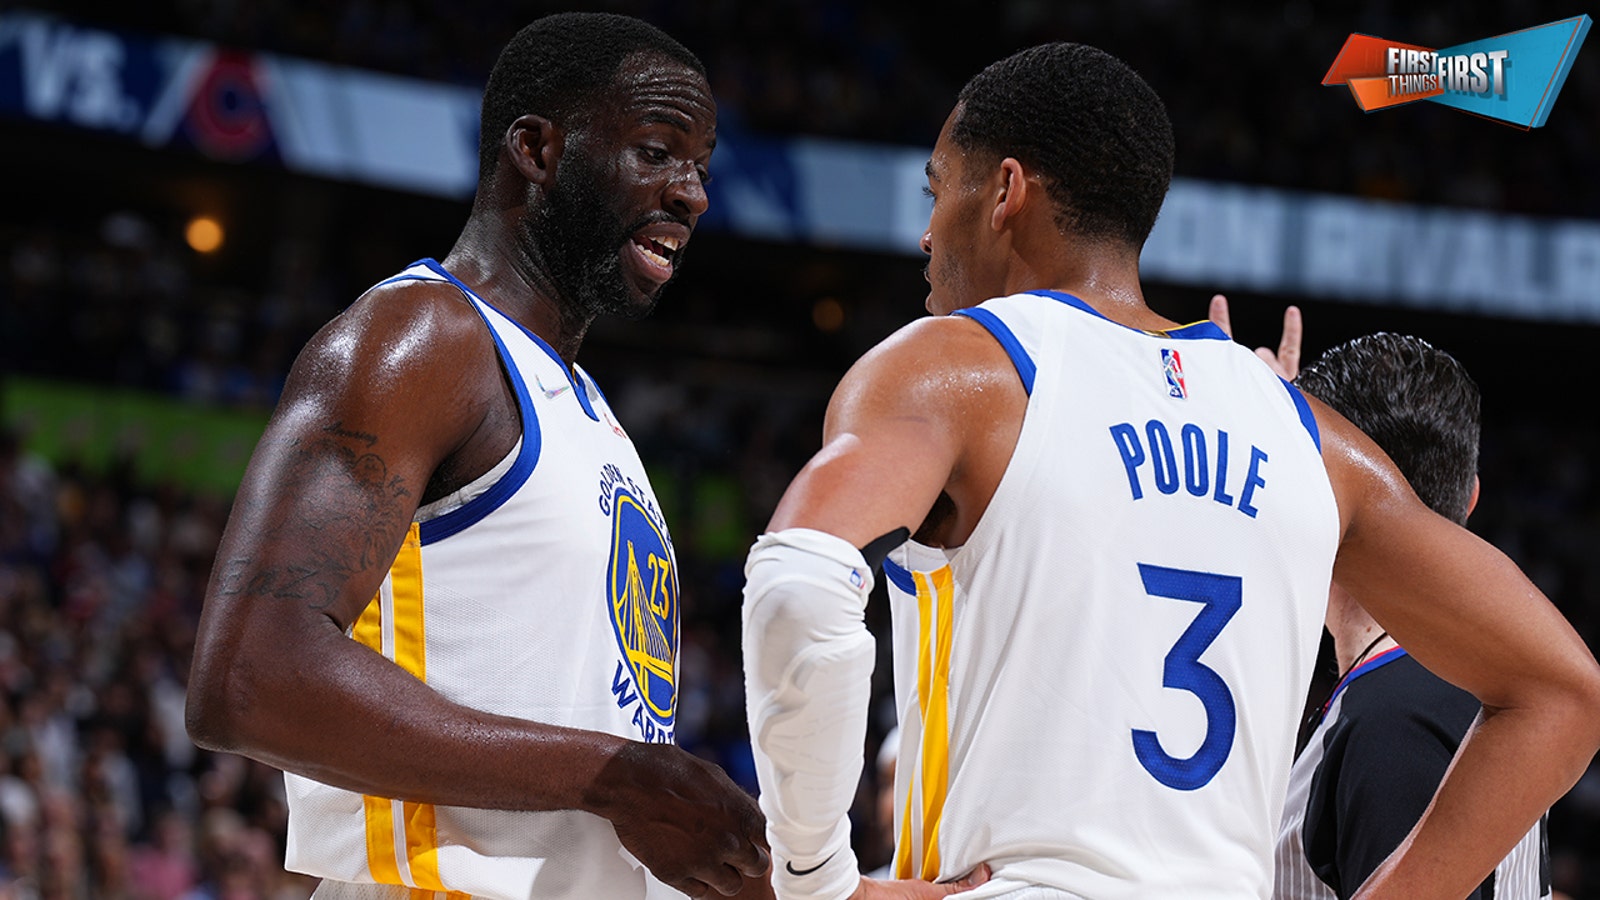 Draymond Green and Jordan Poole fight video surfaces